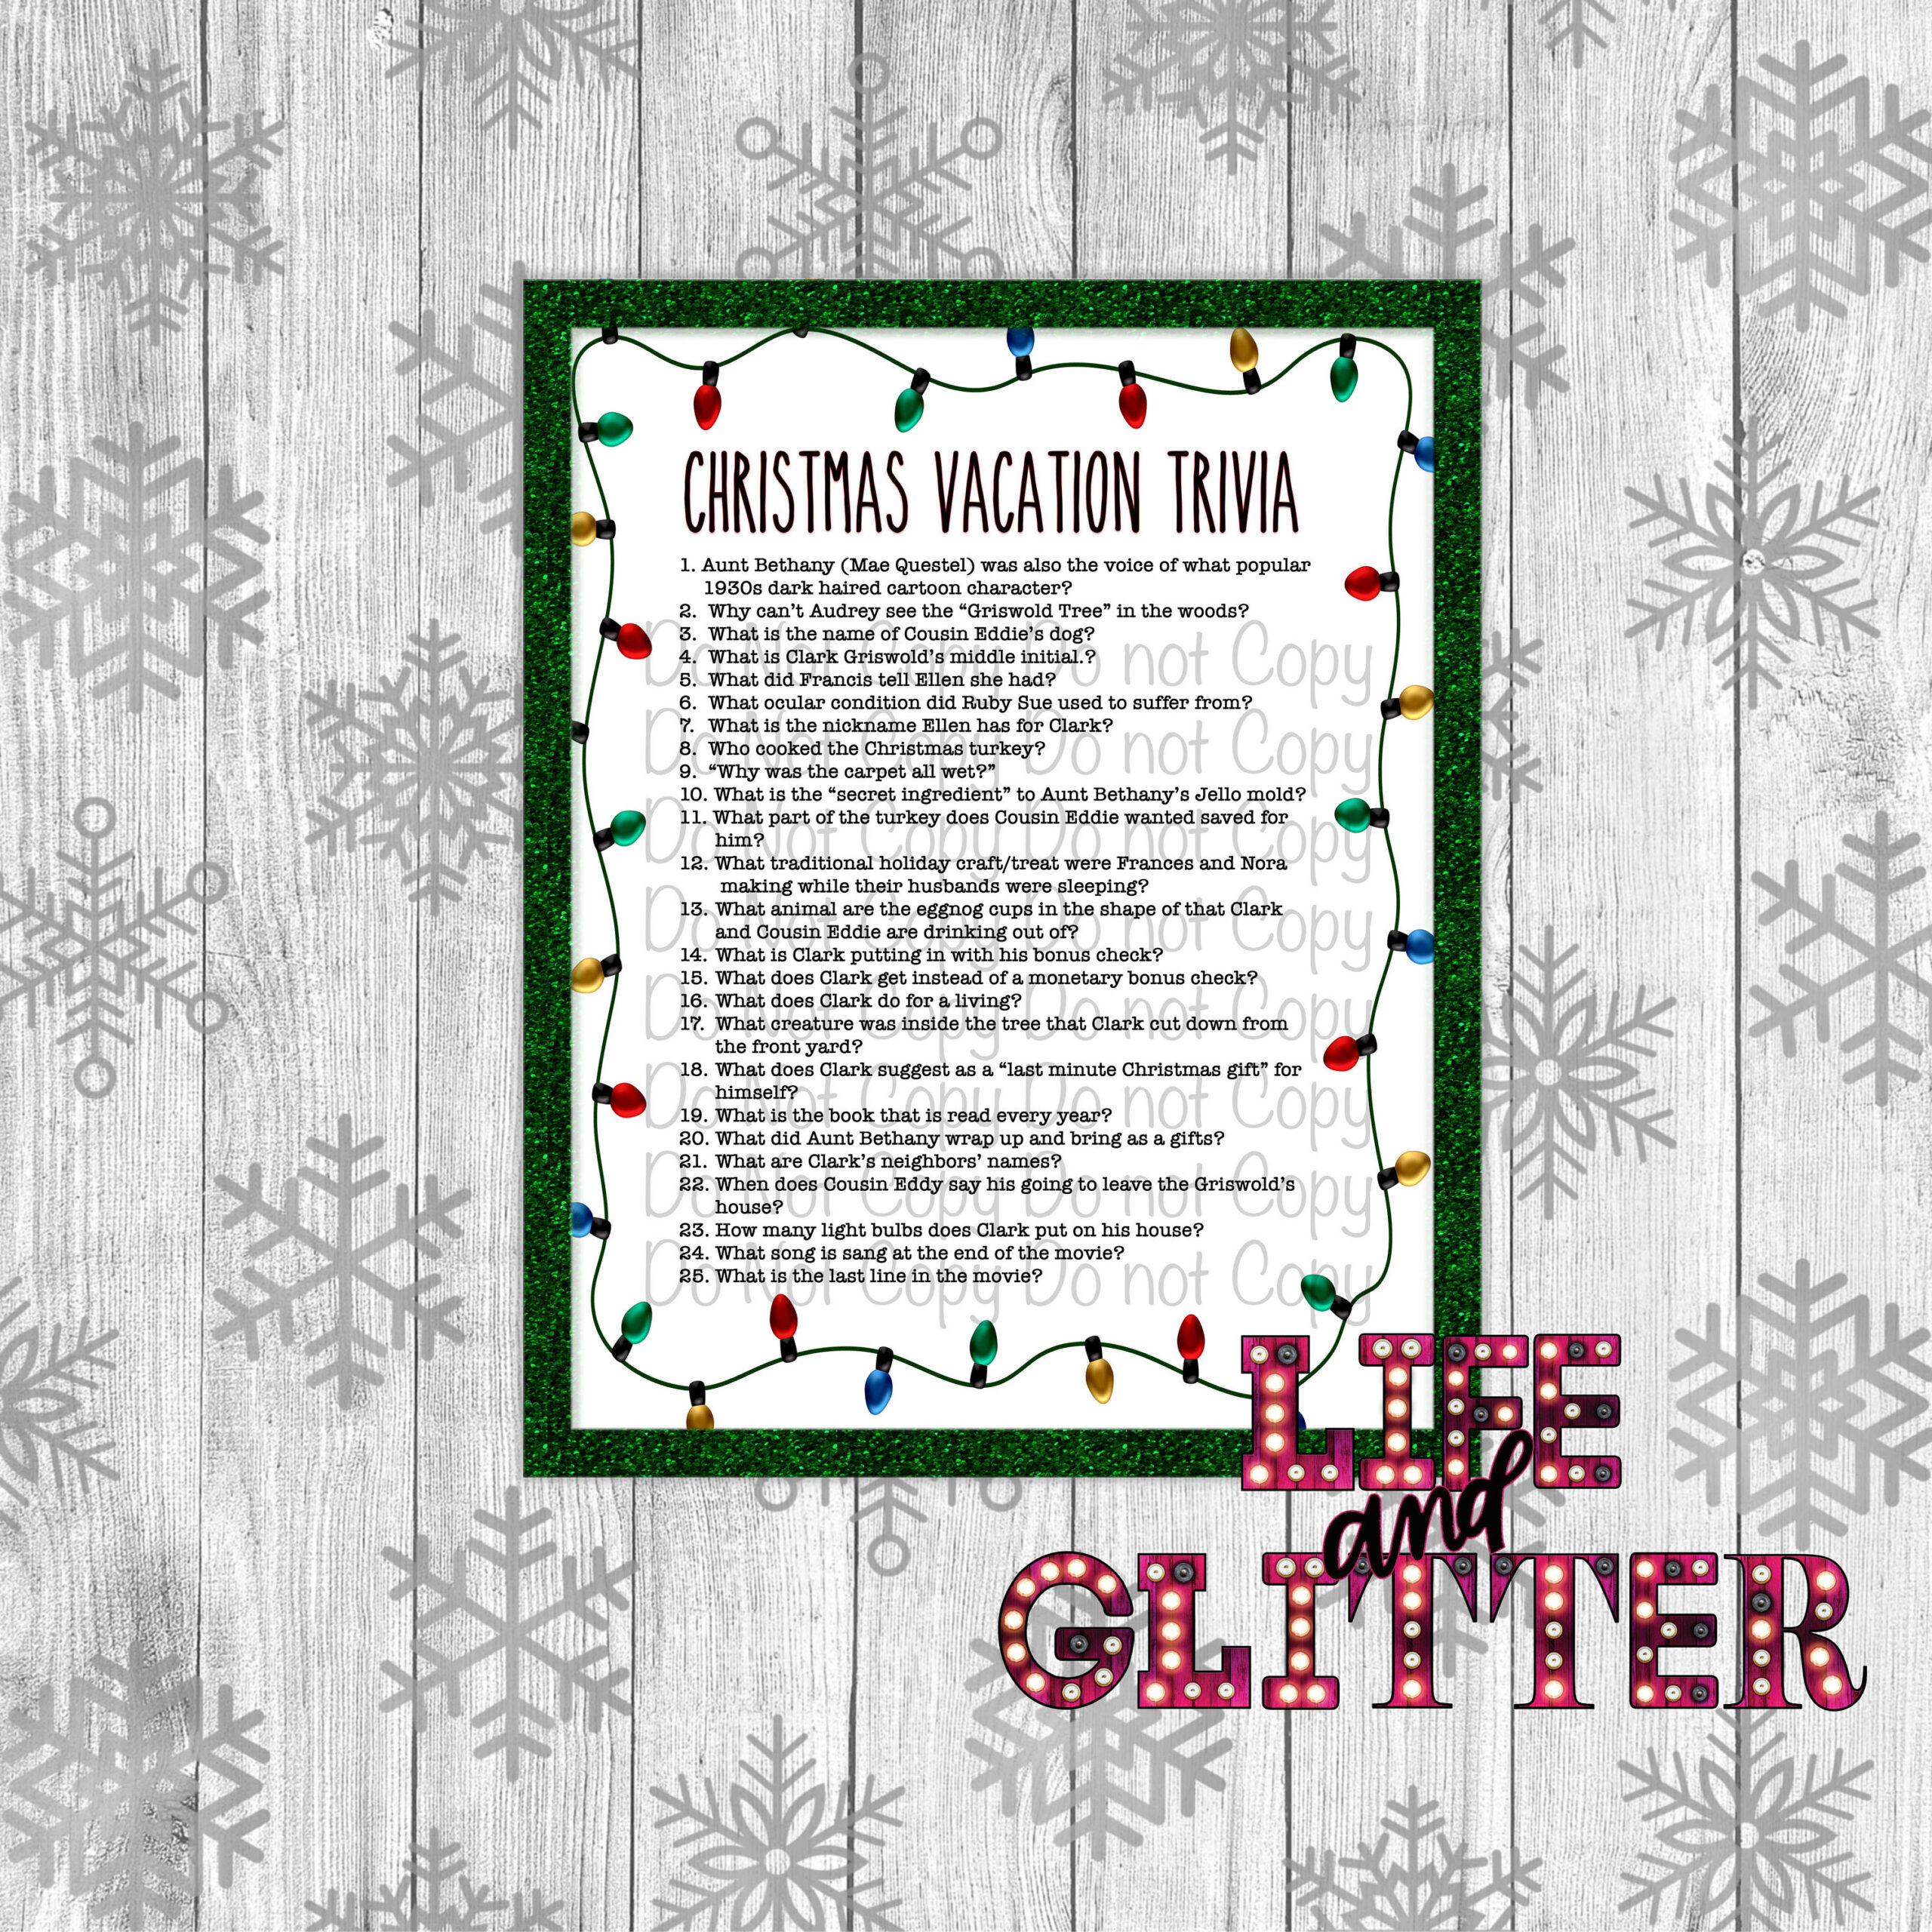 Christmas Vacation Trivia Questions